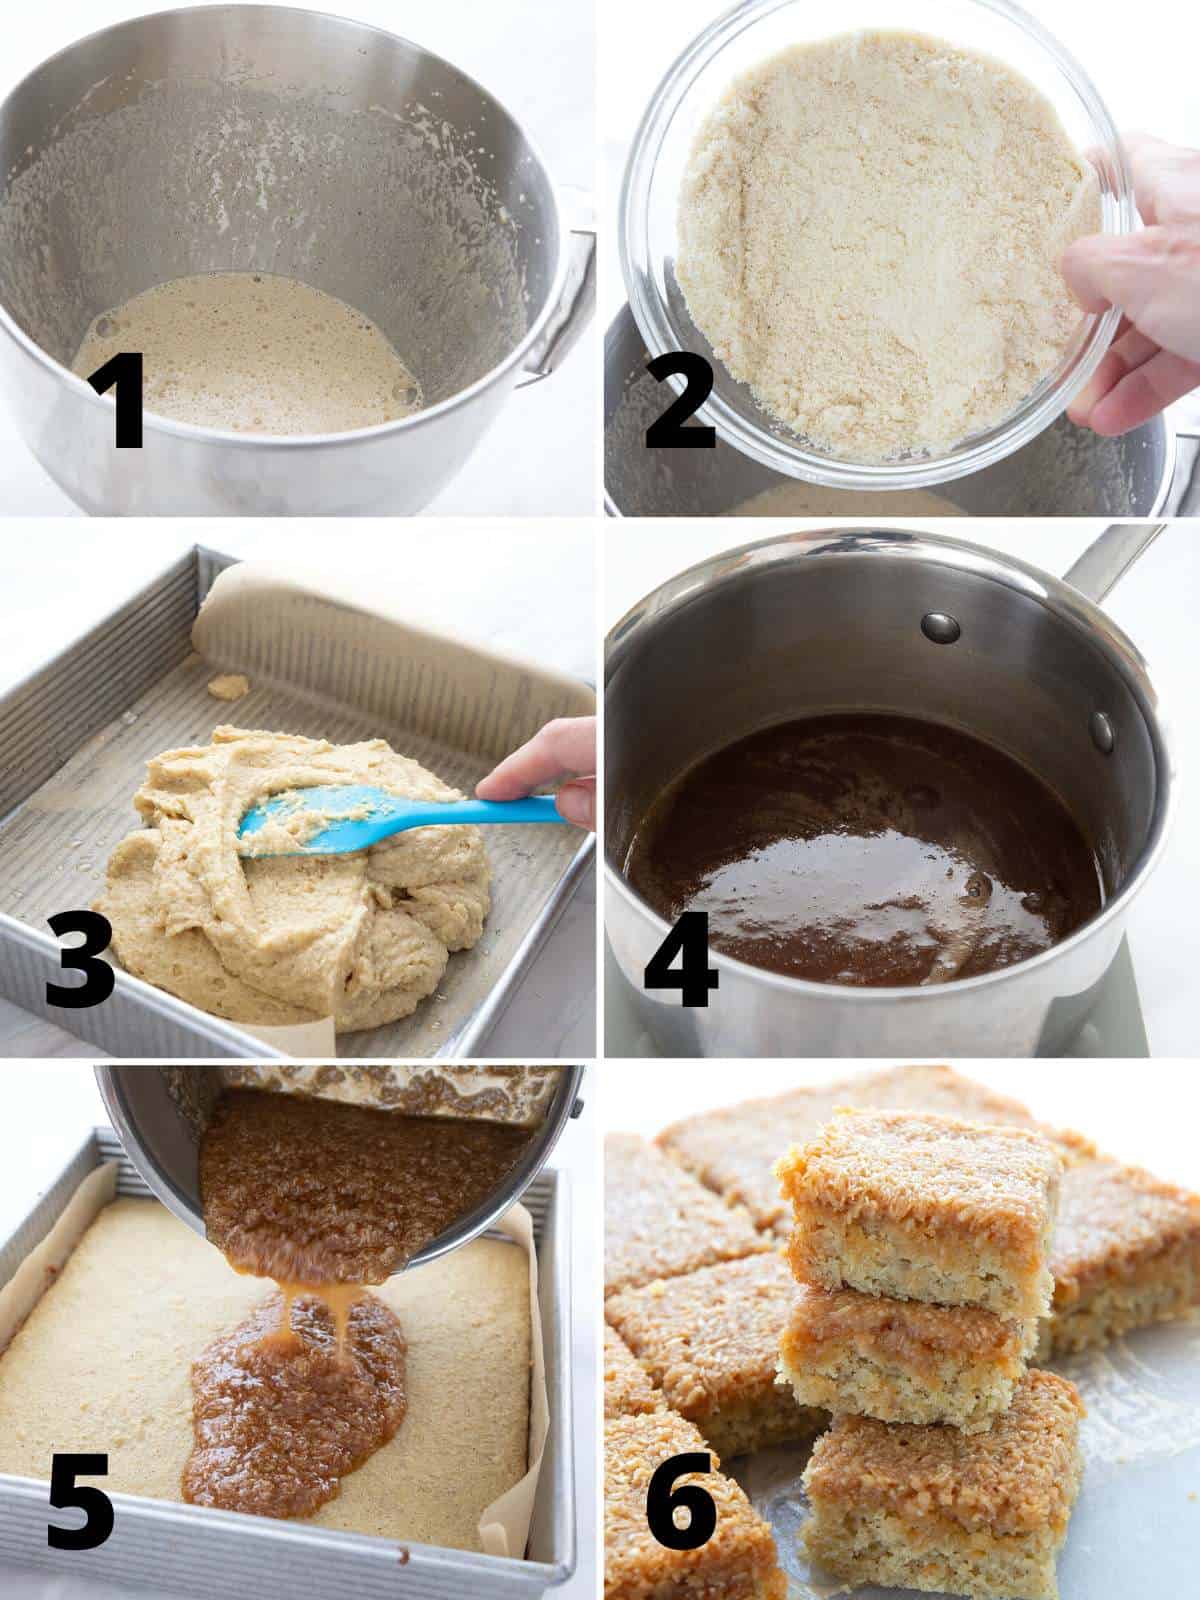 A collage of 6 images showing how to make Keto Danish Dream Cake.